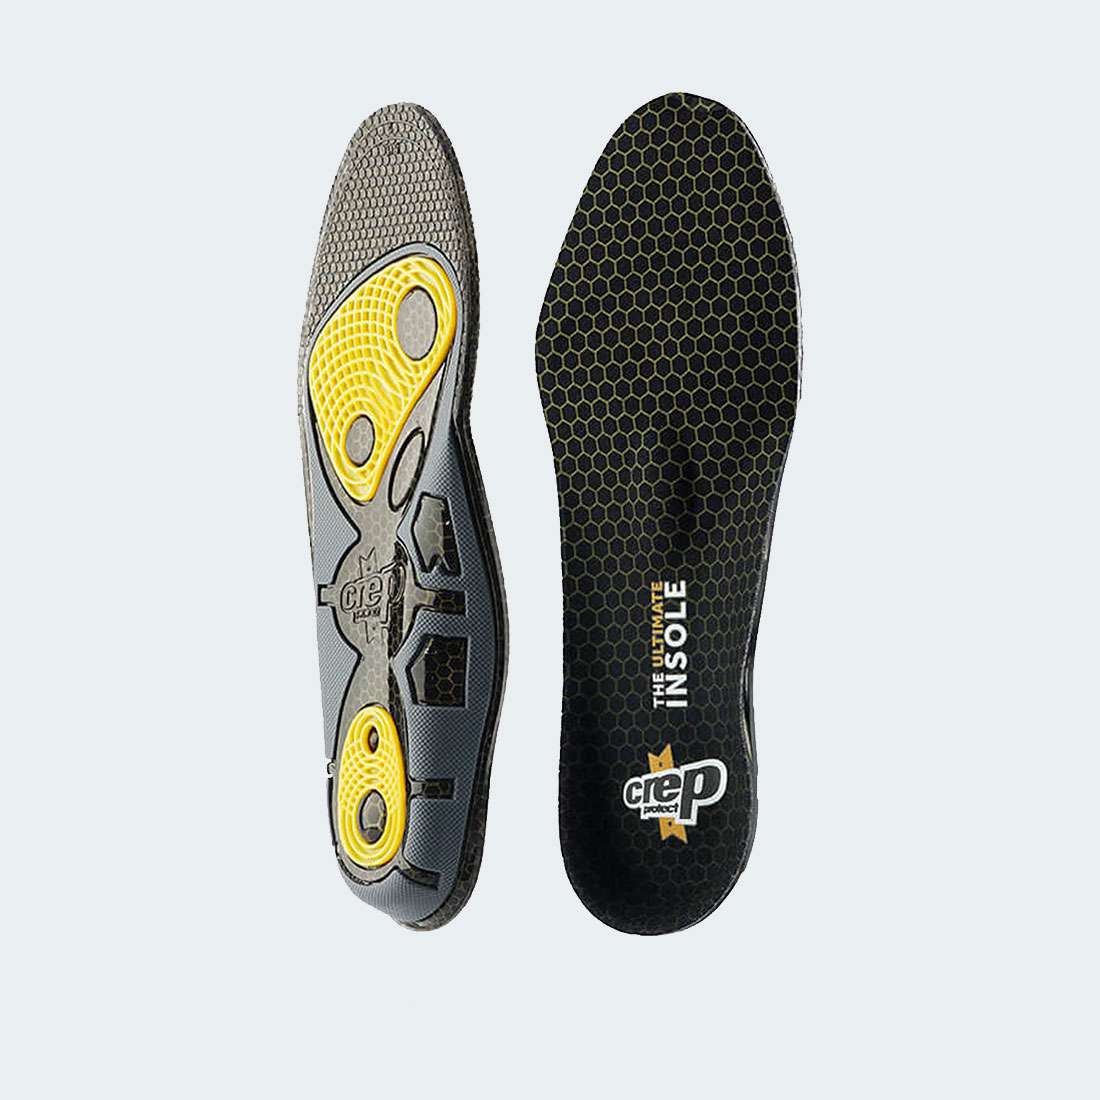 CREP PROTECT GEL INSOLES 38.5-40